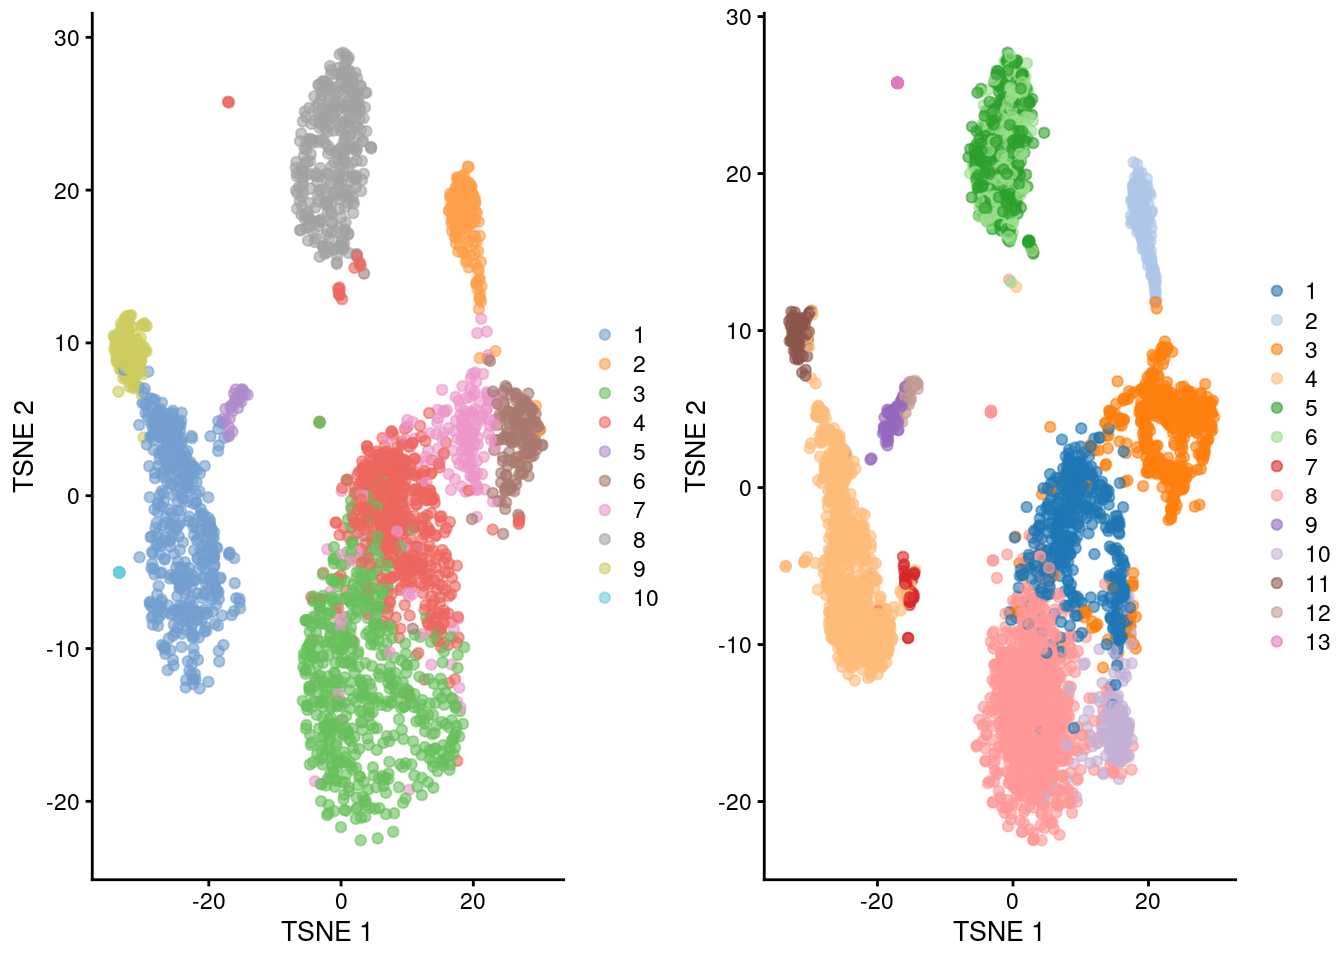 $t$-SNE plots of the merged PBMC datasets, where the merge was performed using only marker genes identified within each batch. Each point represents a cell that is colored by the assigned cluster from the within-batch analysis for the 3K (left) and 4K dataset (right).